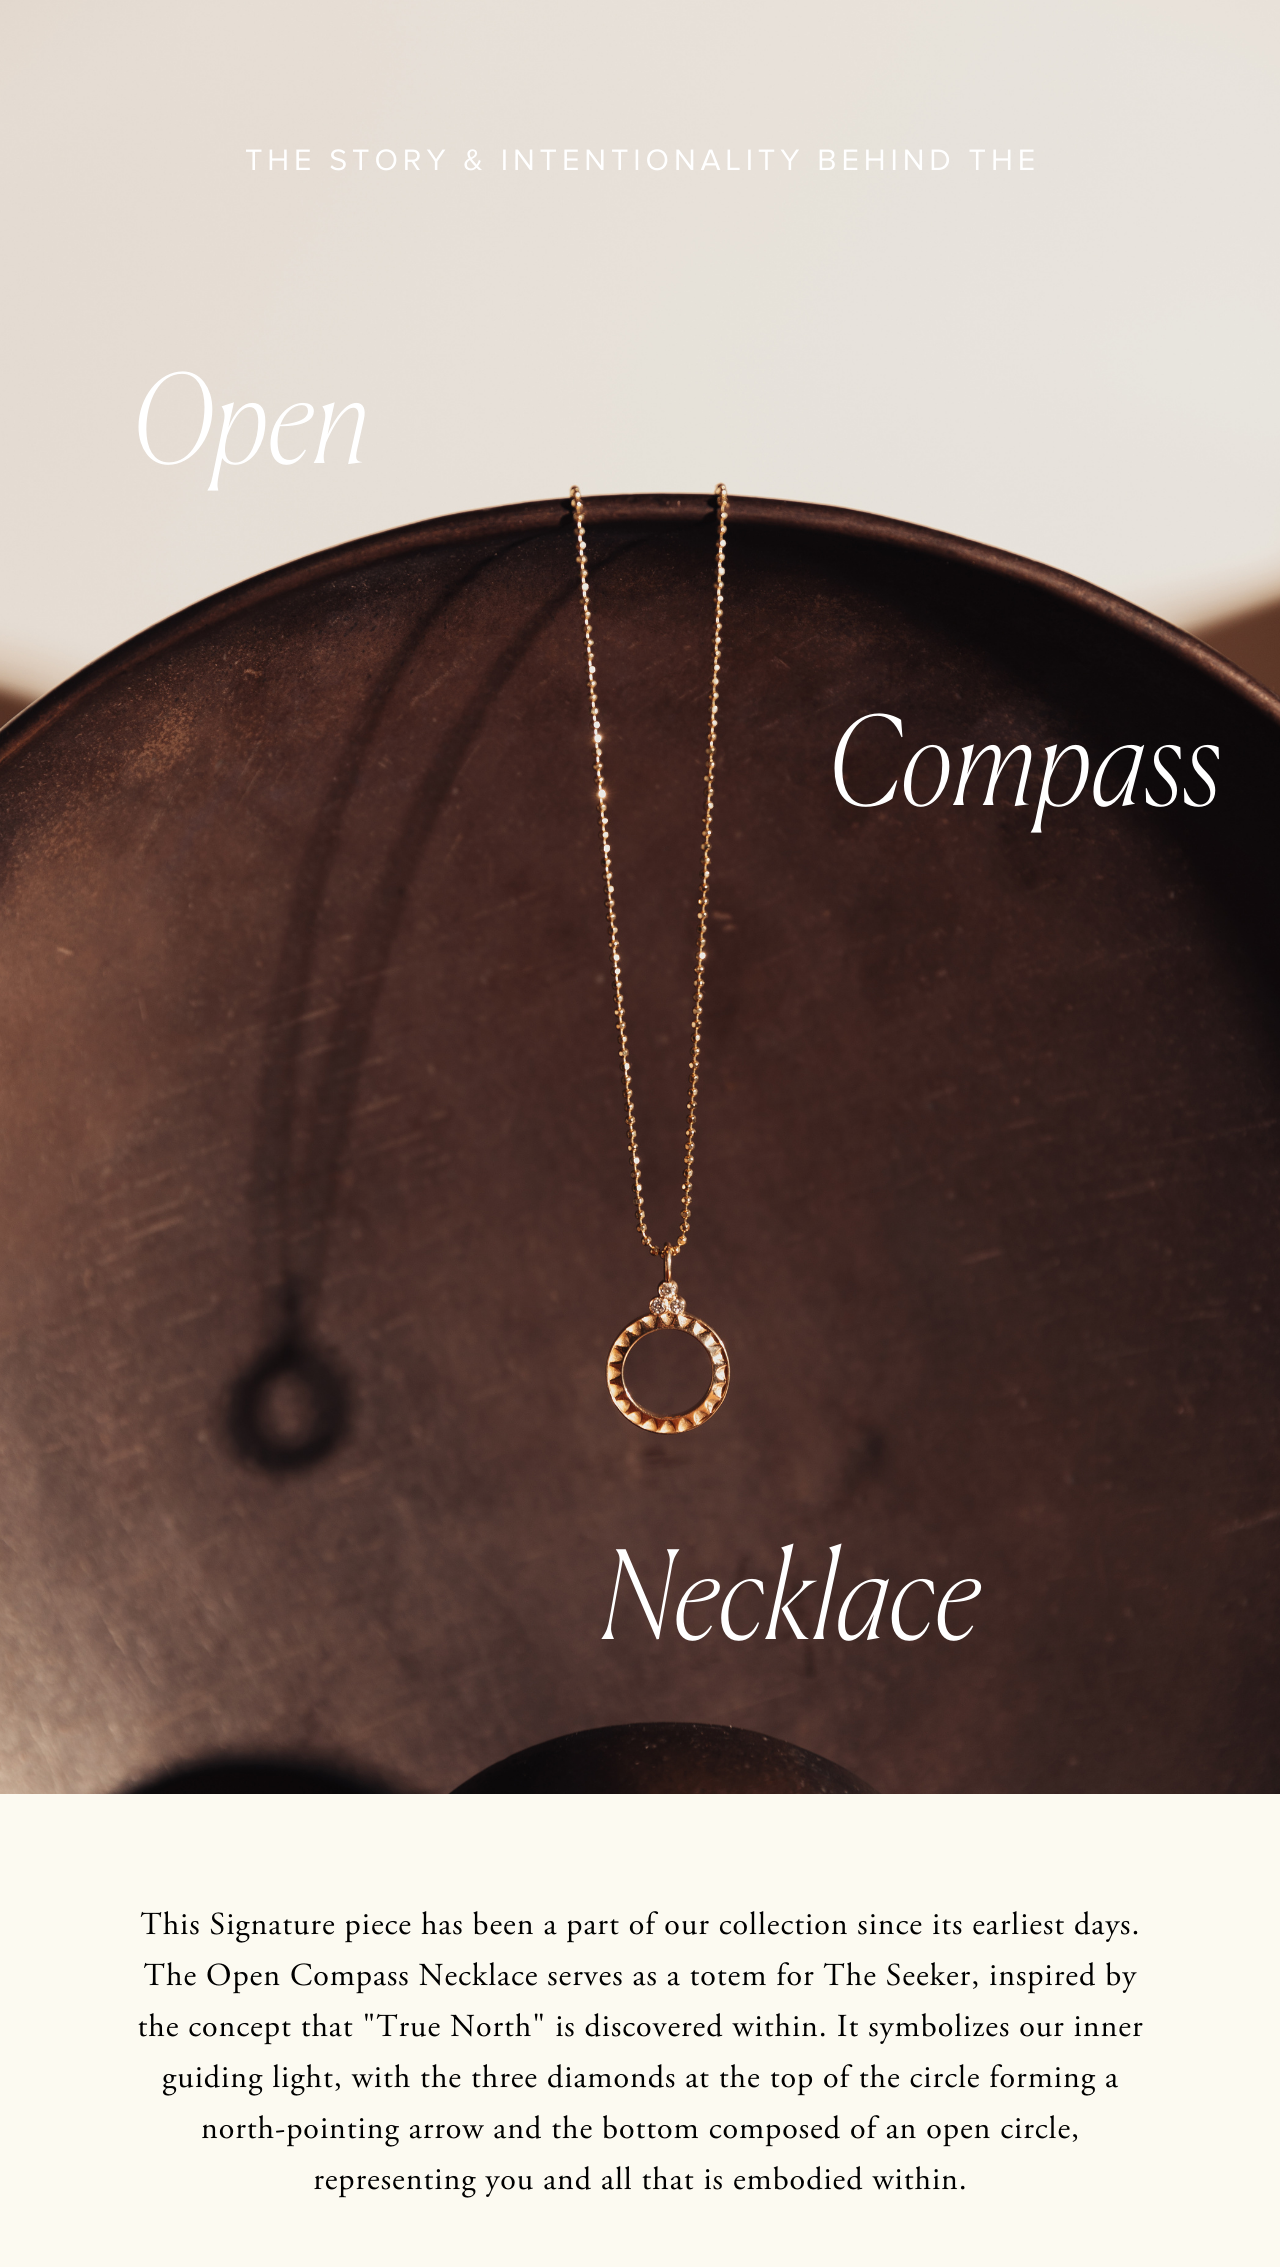 The Open Compass Necklace